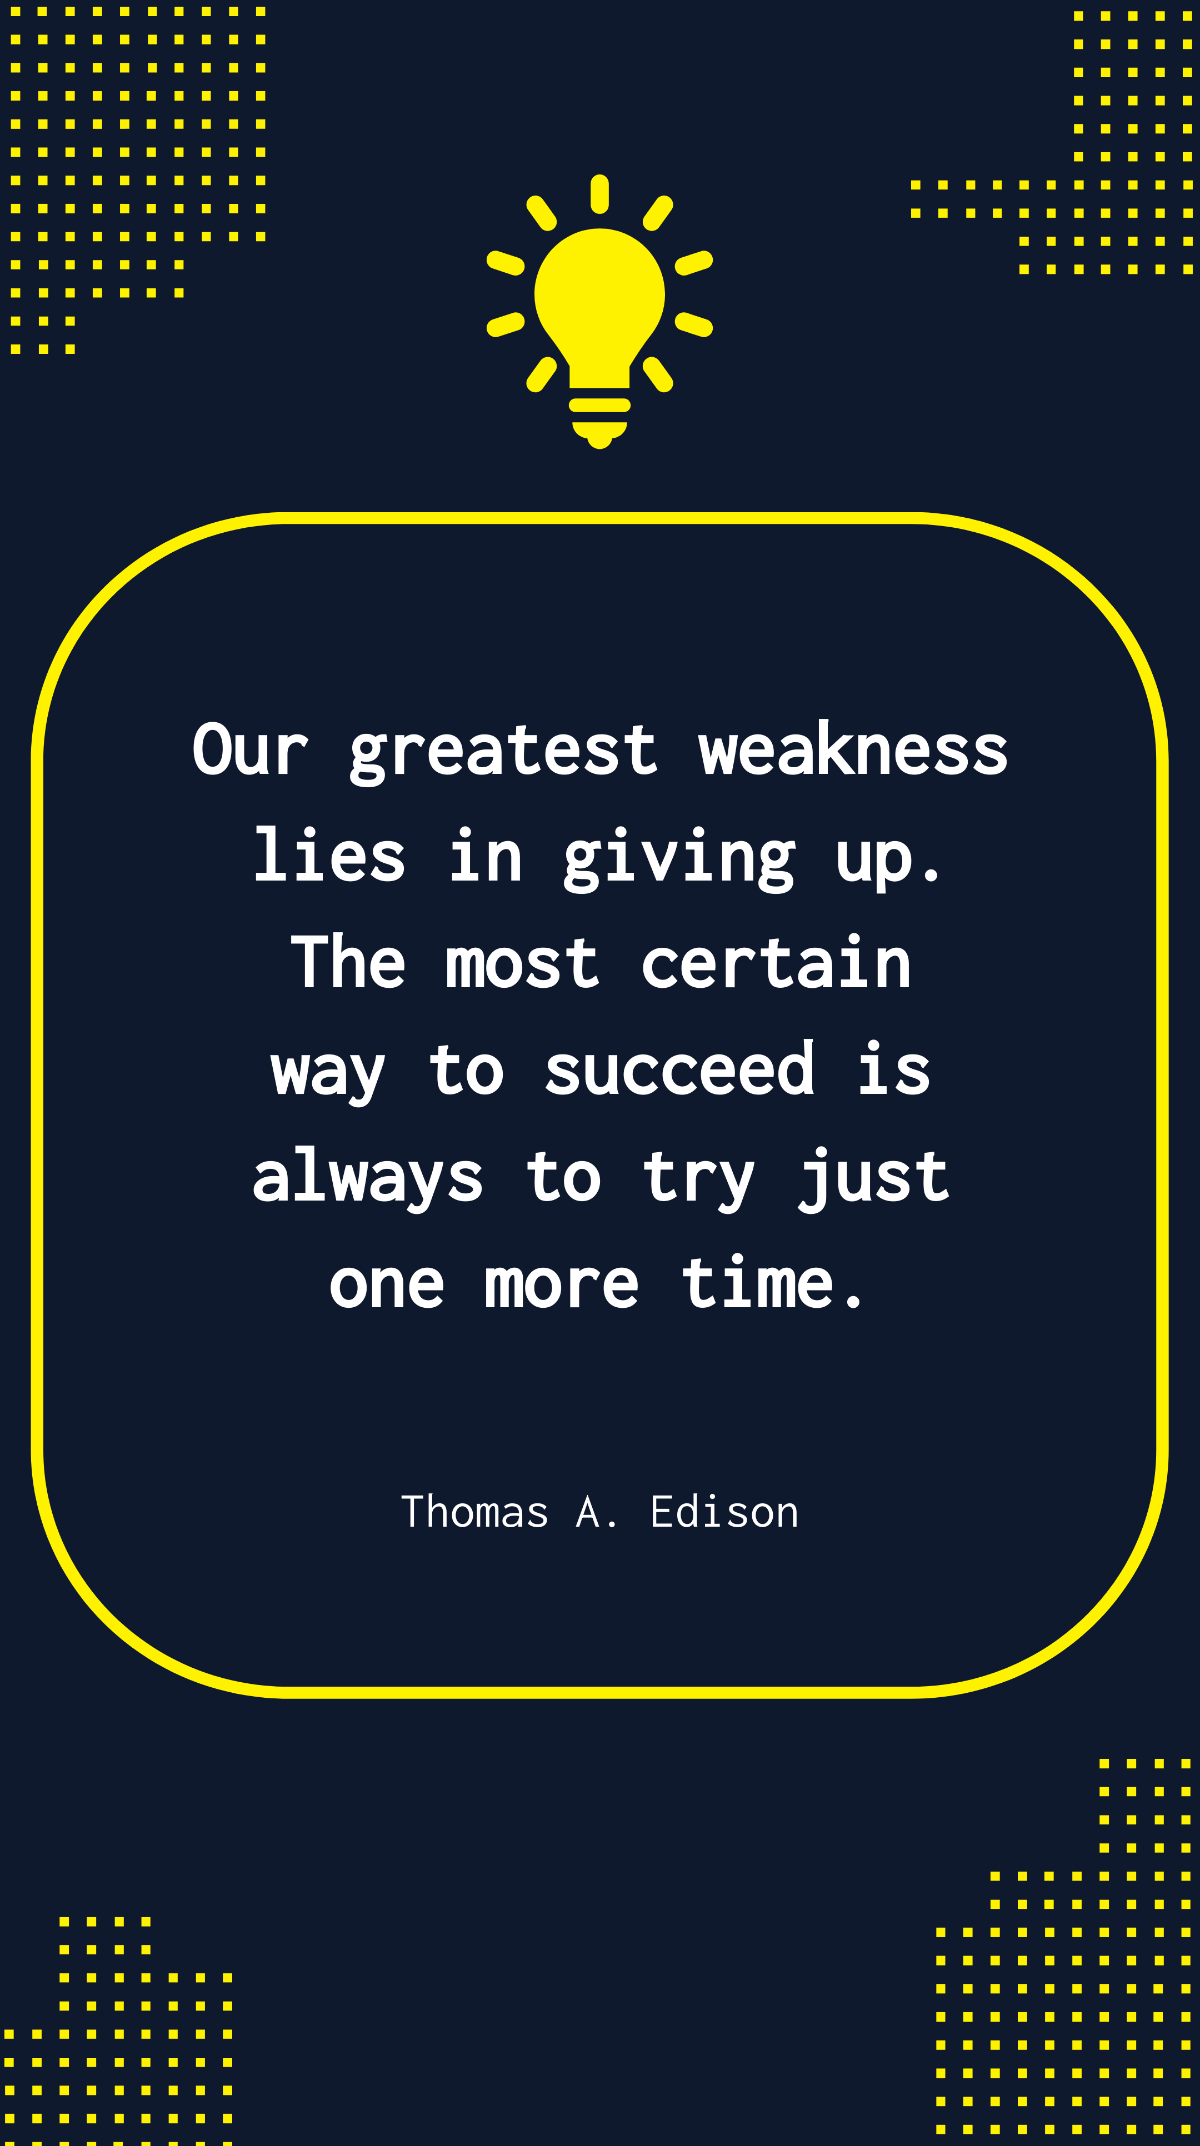 Thomas A. Edison - Our greatest weakness lies in giving up. The most certain way to succeed is always to try just one more time. Template